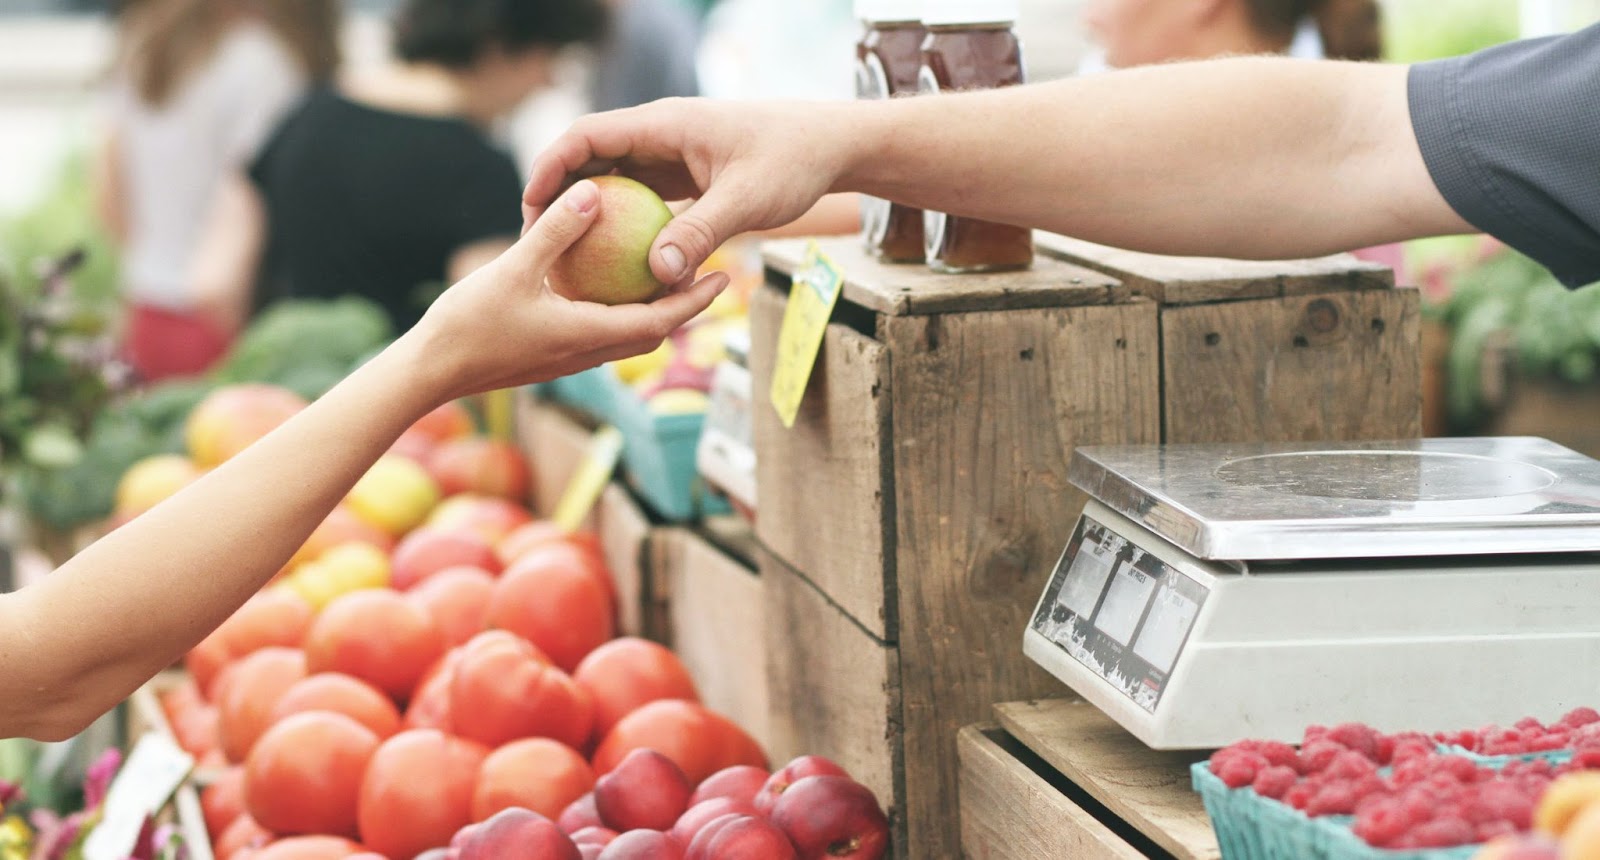 Grocery clerk hands an apple to a person. Display is abundantly overflowing with fresh produce. How can a software company possibly address every facet of every retail operation?